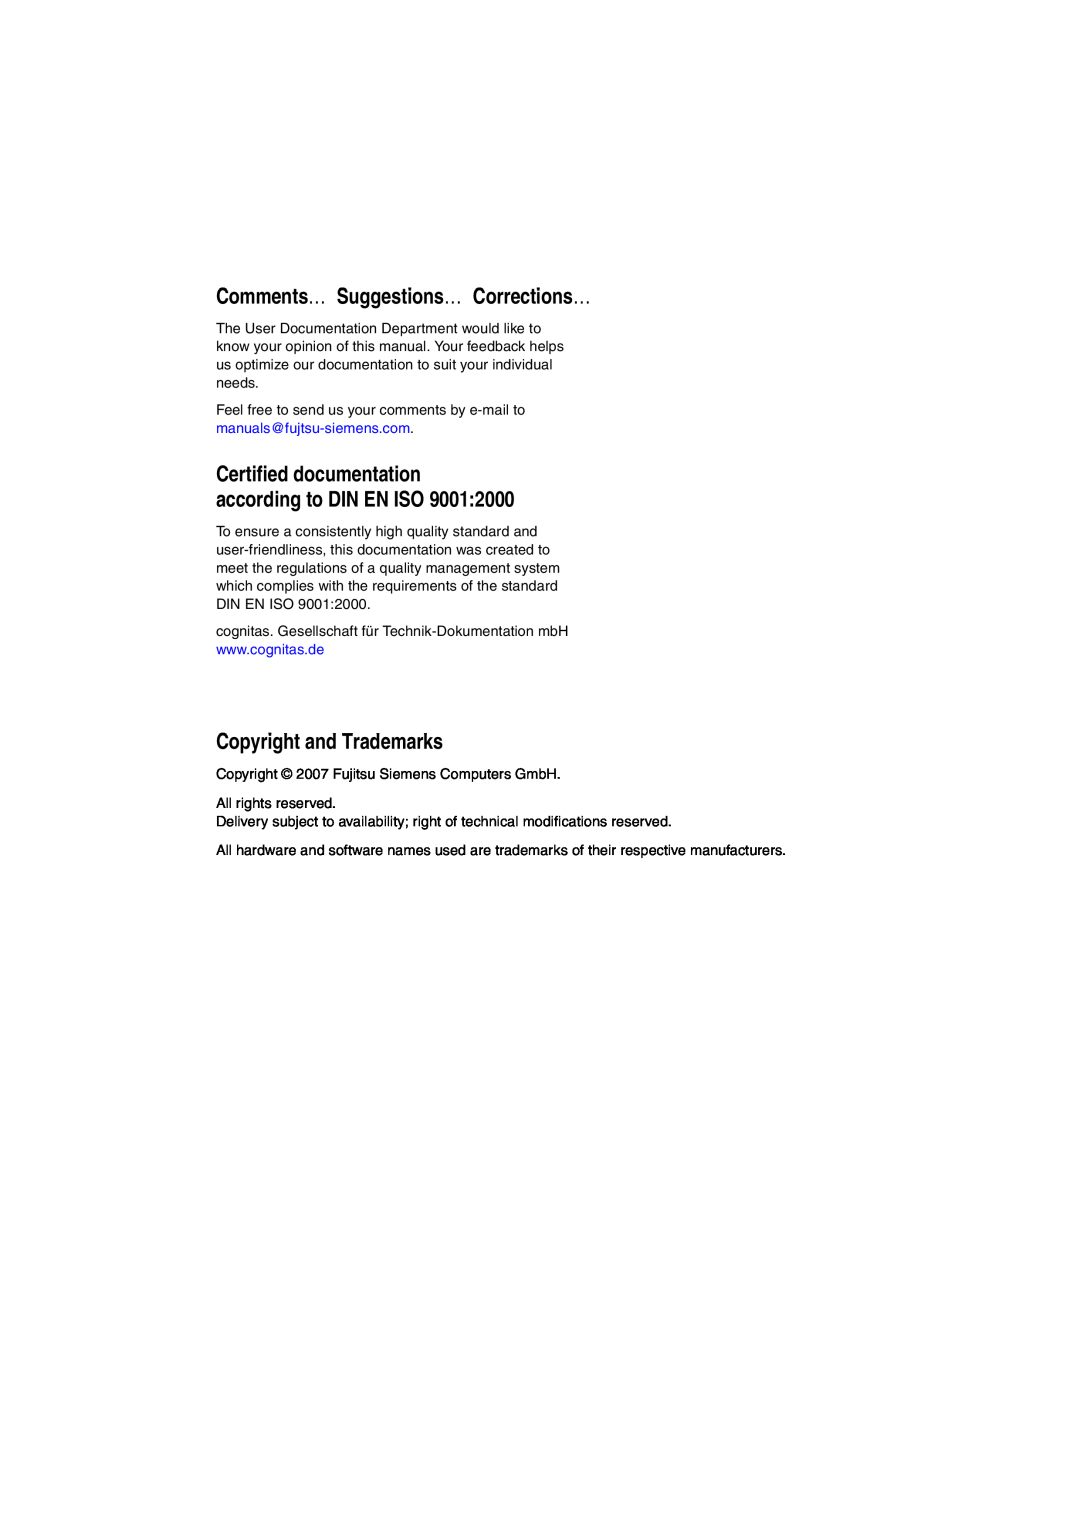 Fujitsu BX600 S2 manual Comments… Suggestions… Corrections…, Copyright and Trademarks 